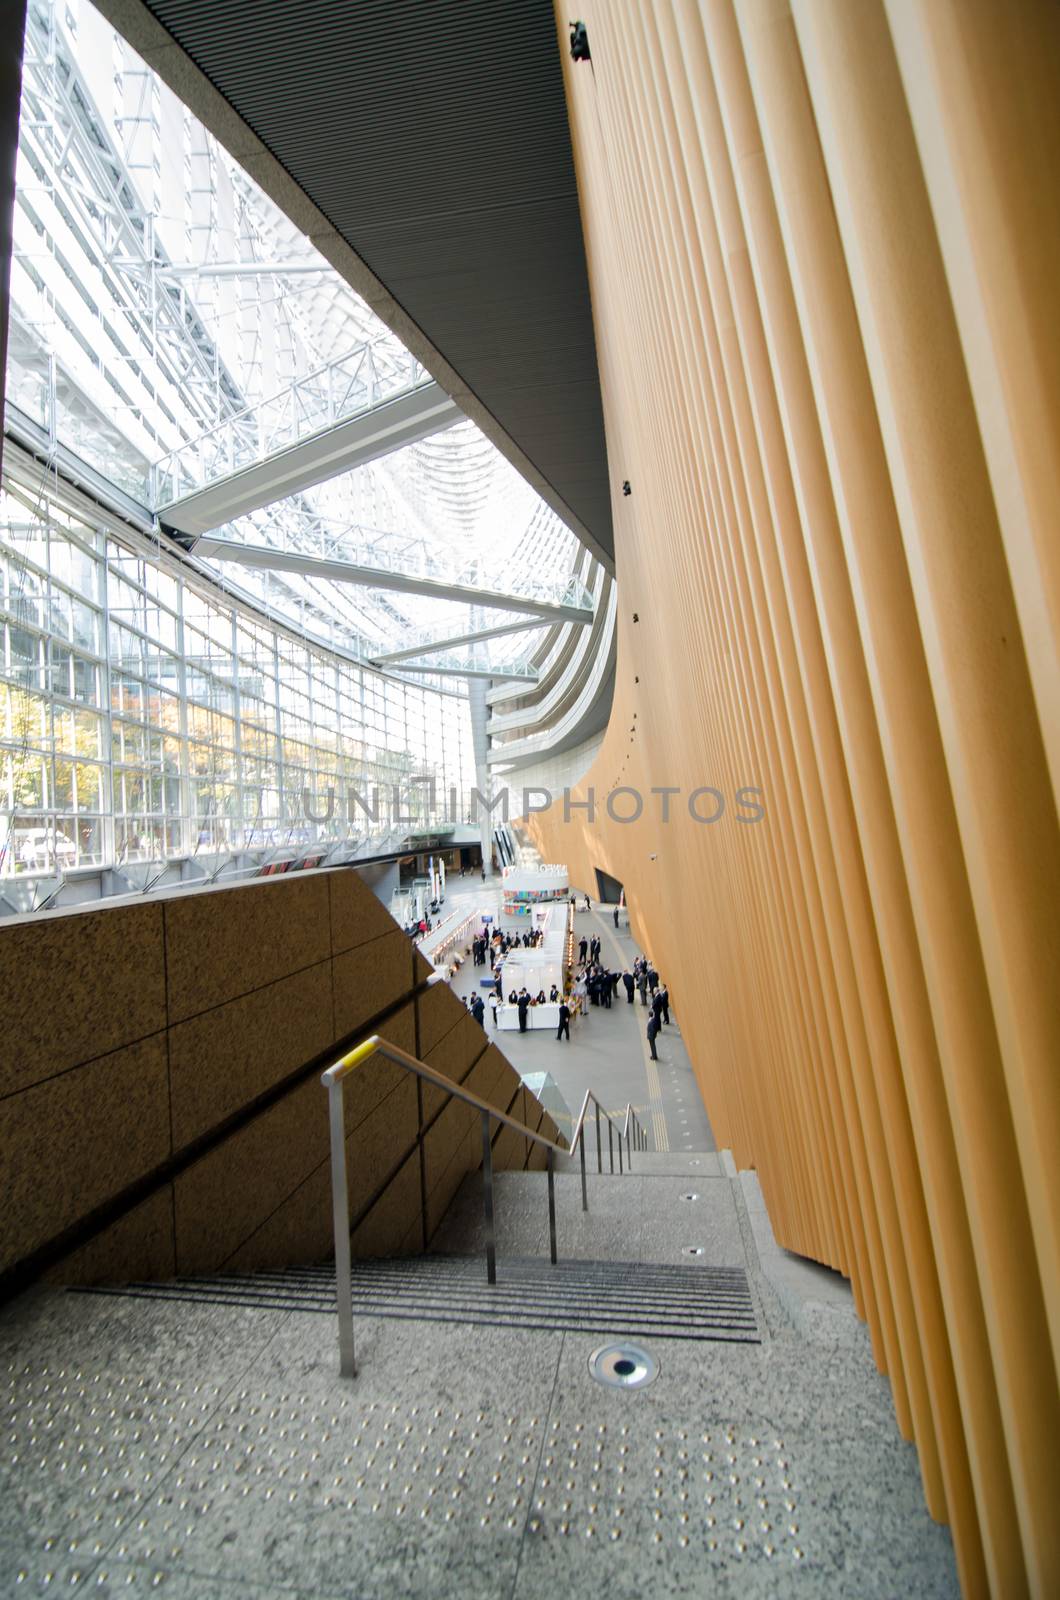 Tokyo, Japan - November 26, 2013: People visit Tokyo International Forum on November 26 2013 in Tokyo Japan. the Forum is one of Tokyo's architectural marvels. Architect Rafael Vinoly won Japan's first international architecture competition with his design.